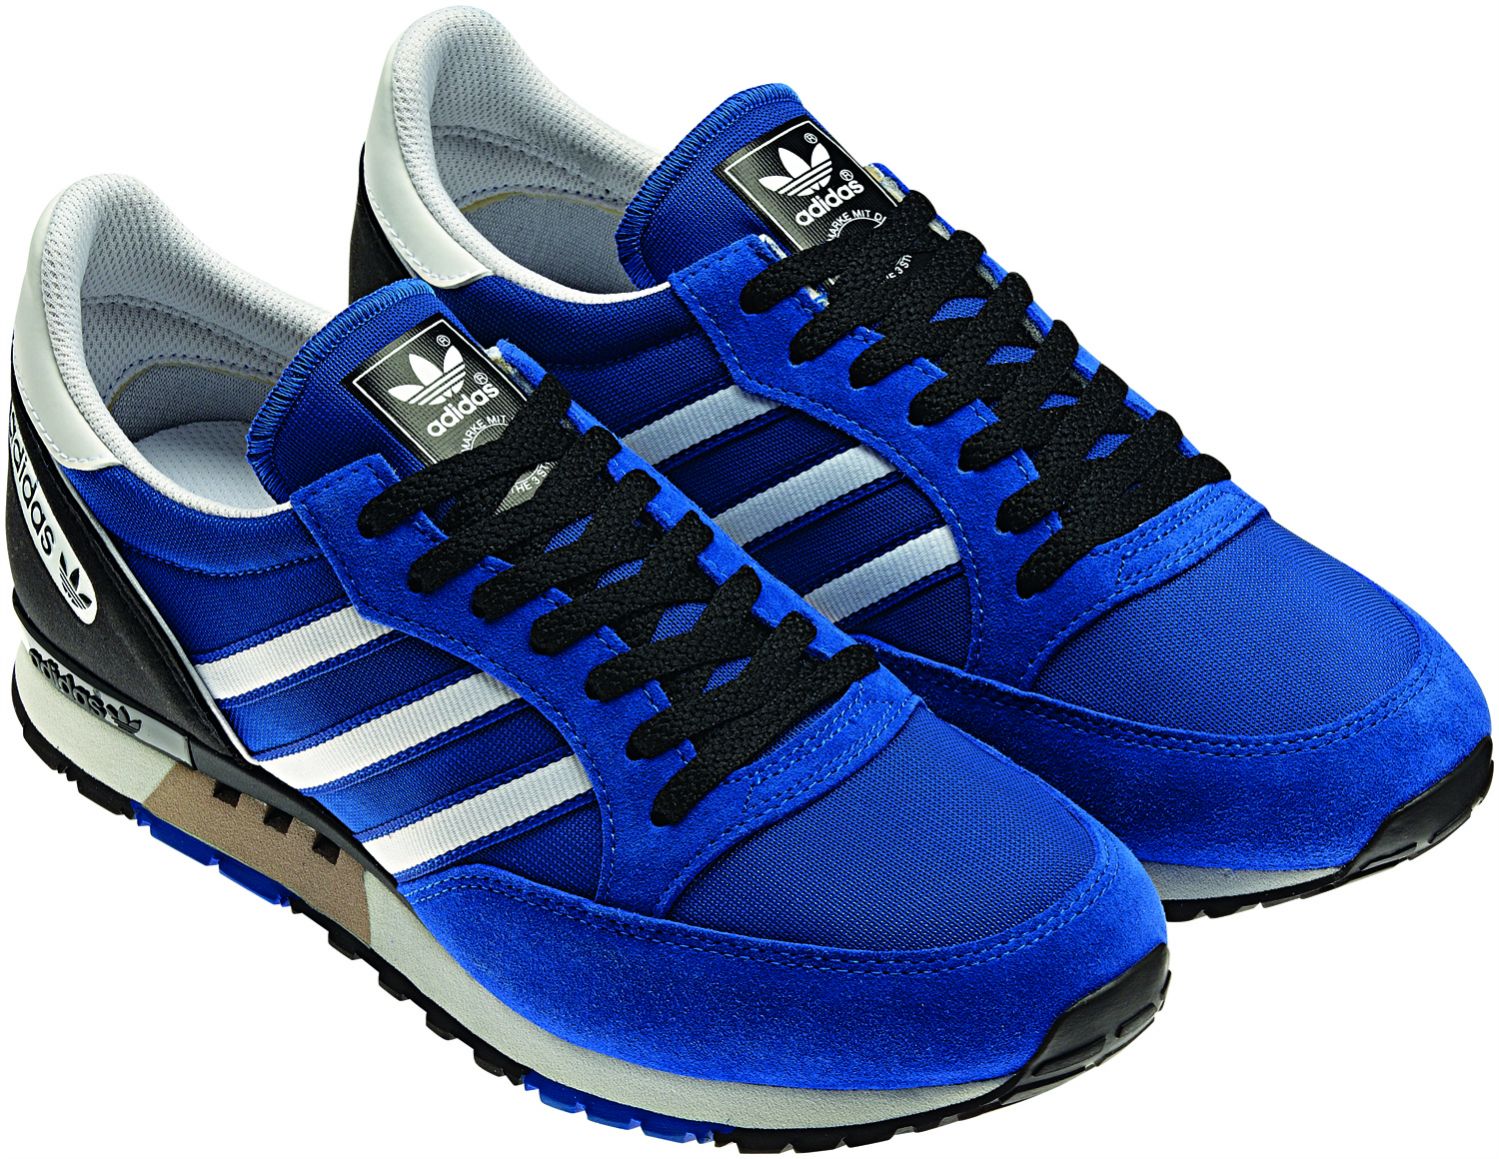 Throwback Thursday: These 80s Adidas Shoes Are Hip Again